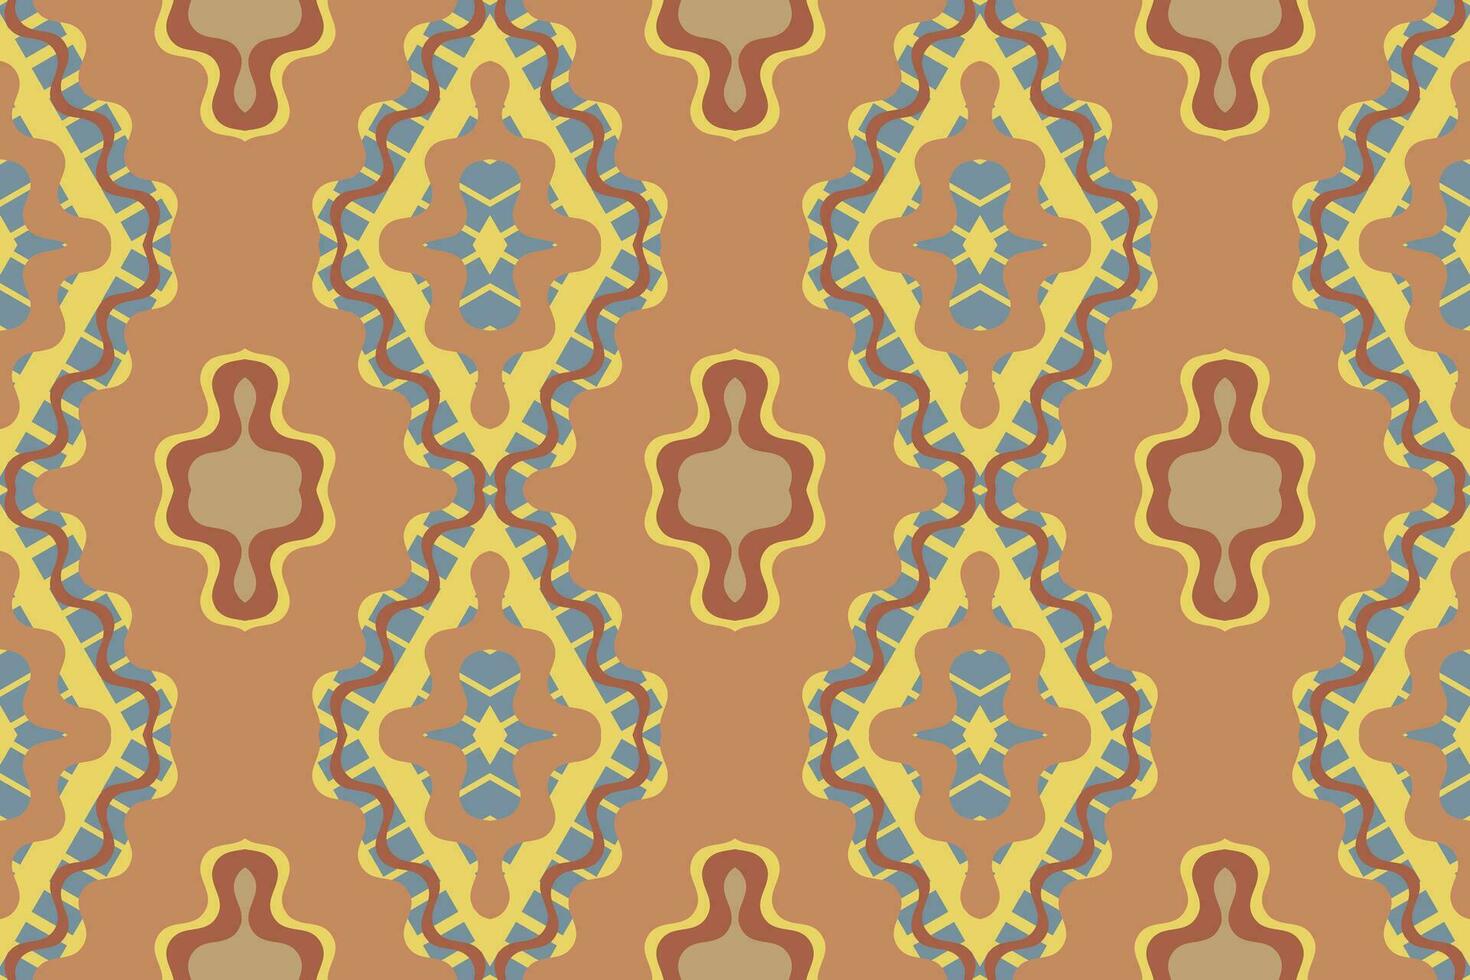 Ikat Damask Paisley Embroidery Background. Ikat Designs Geometric Ethnic Oriental Pattern Traditional. Ikat Aztec Style Abstract Design for Print Texture,fabric,saree,sari,carpet. vector